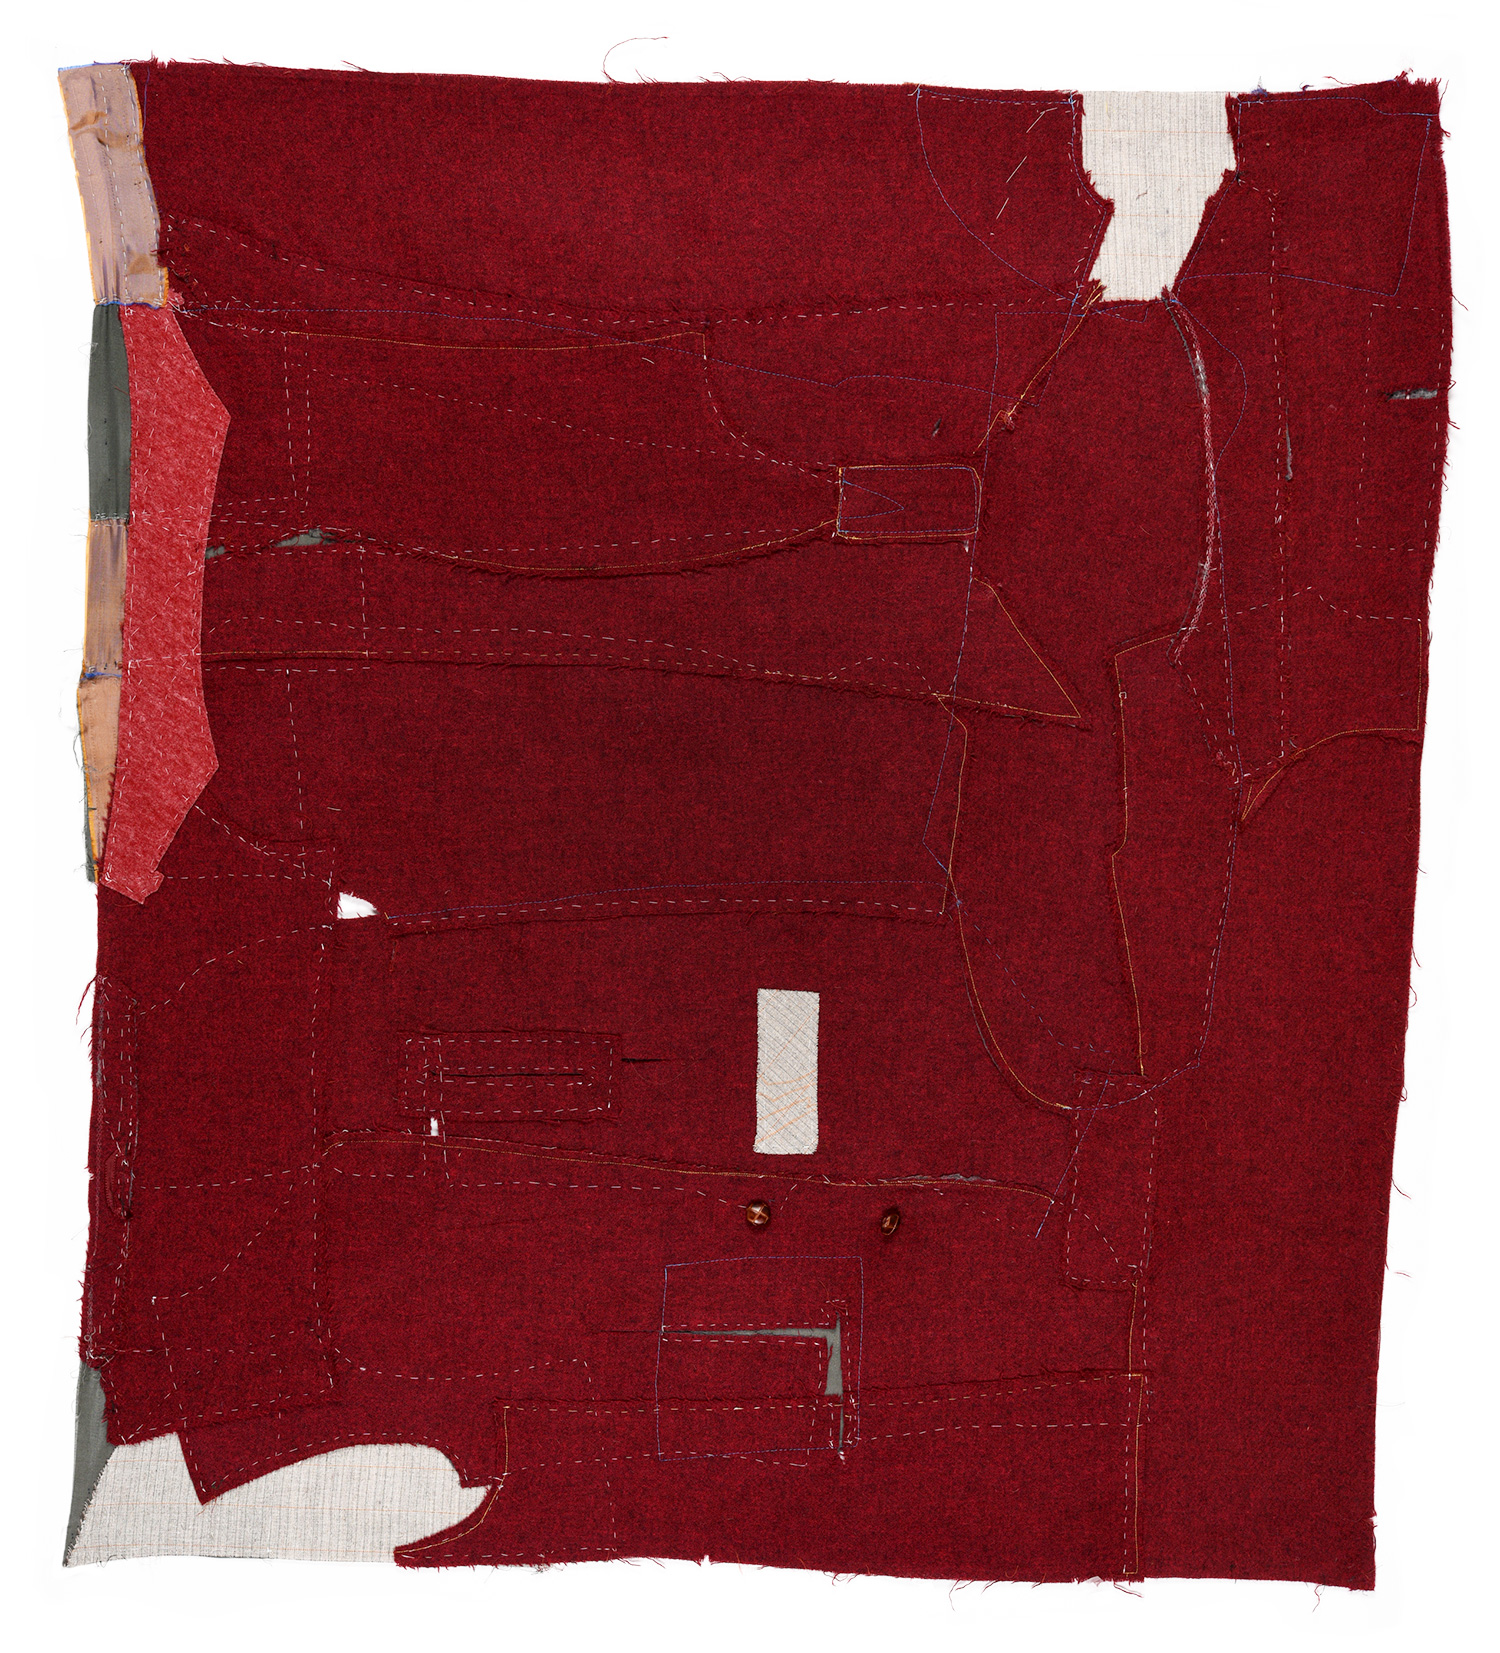 Maria Lilja, Cutting Up 7 Red Out, 2020,  122 x 108 cm